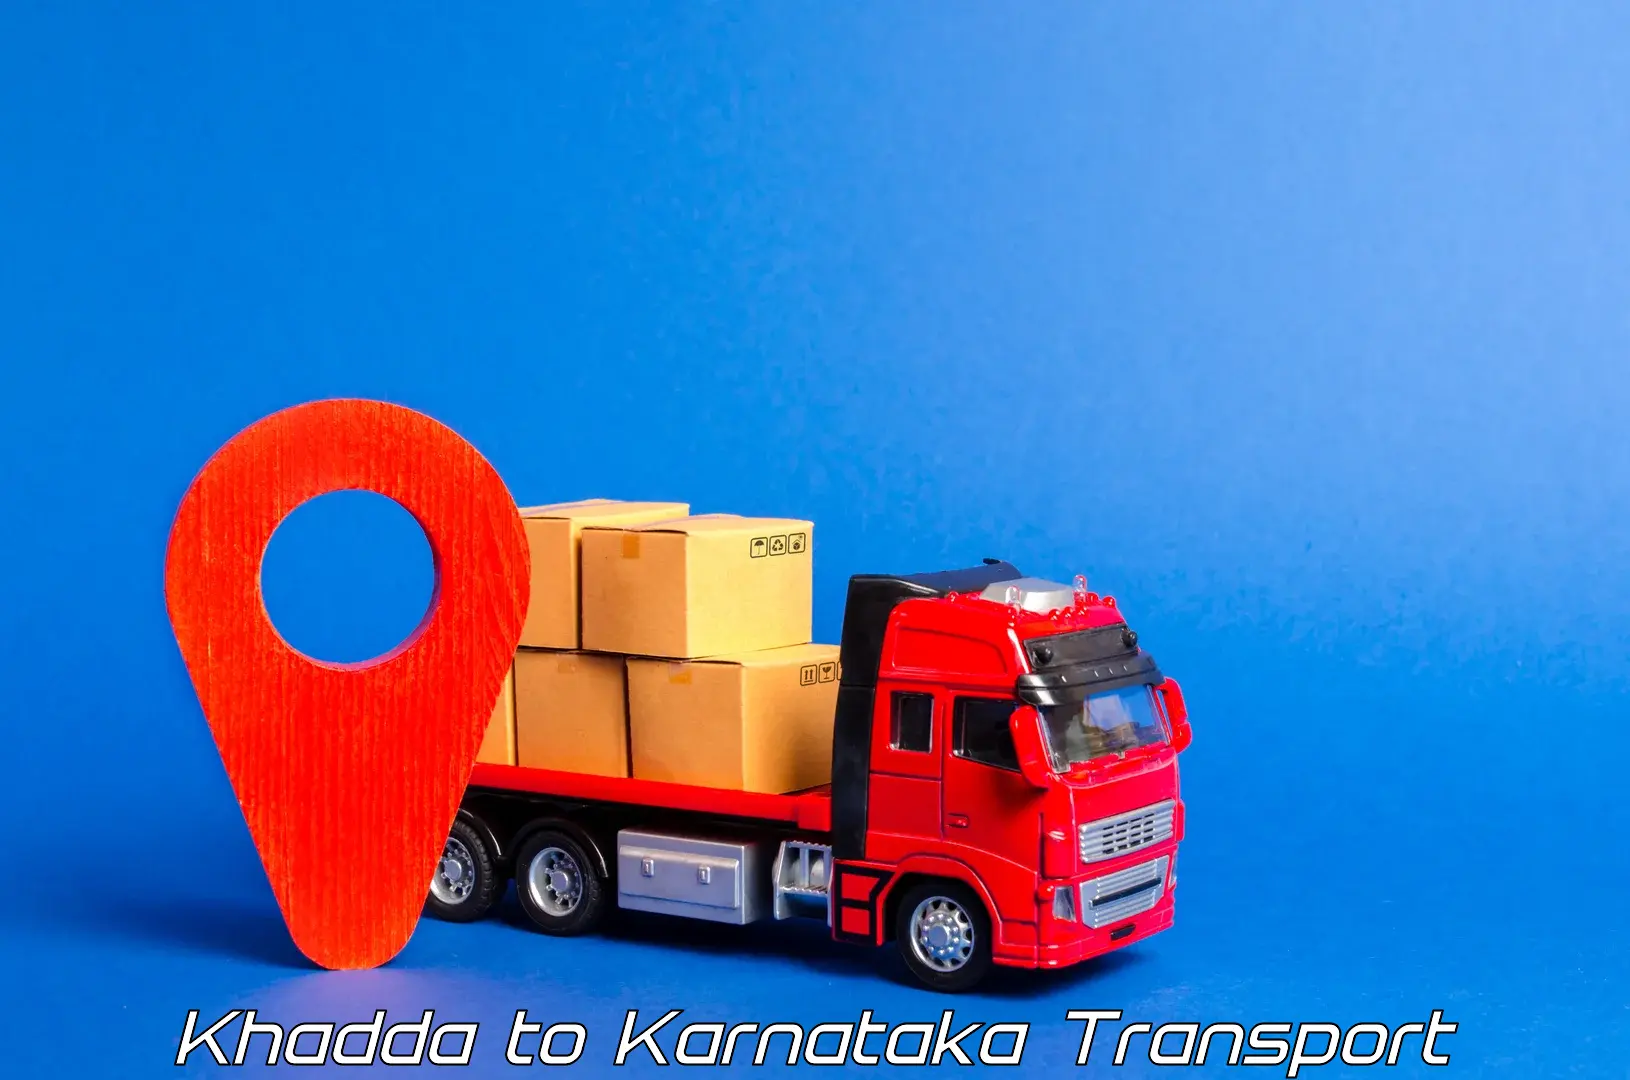 Road transport services Khadda to Manipal Academy of Higher Education